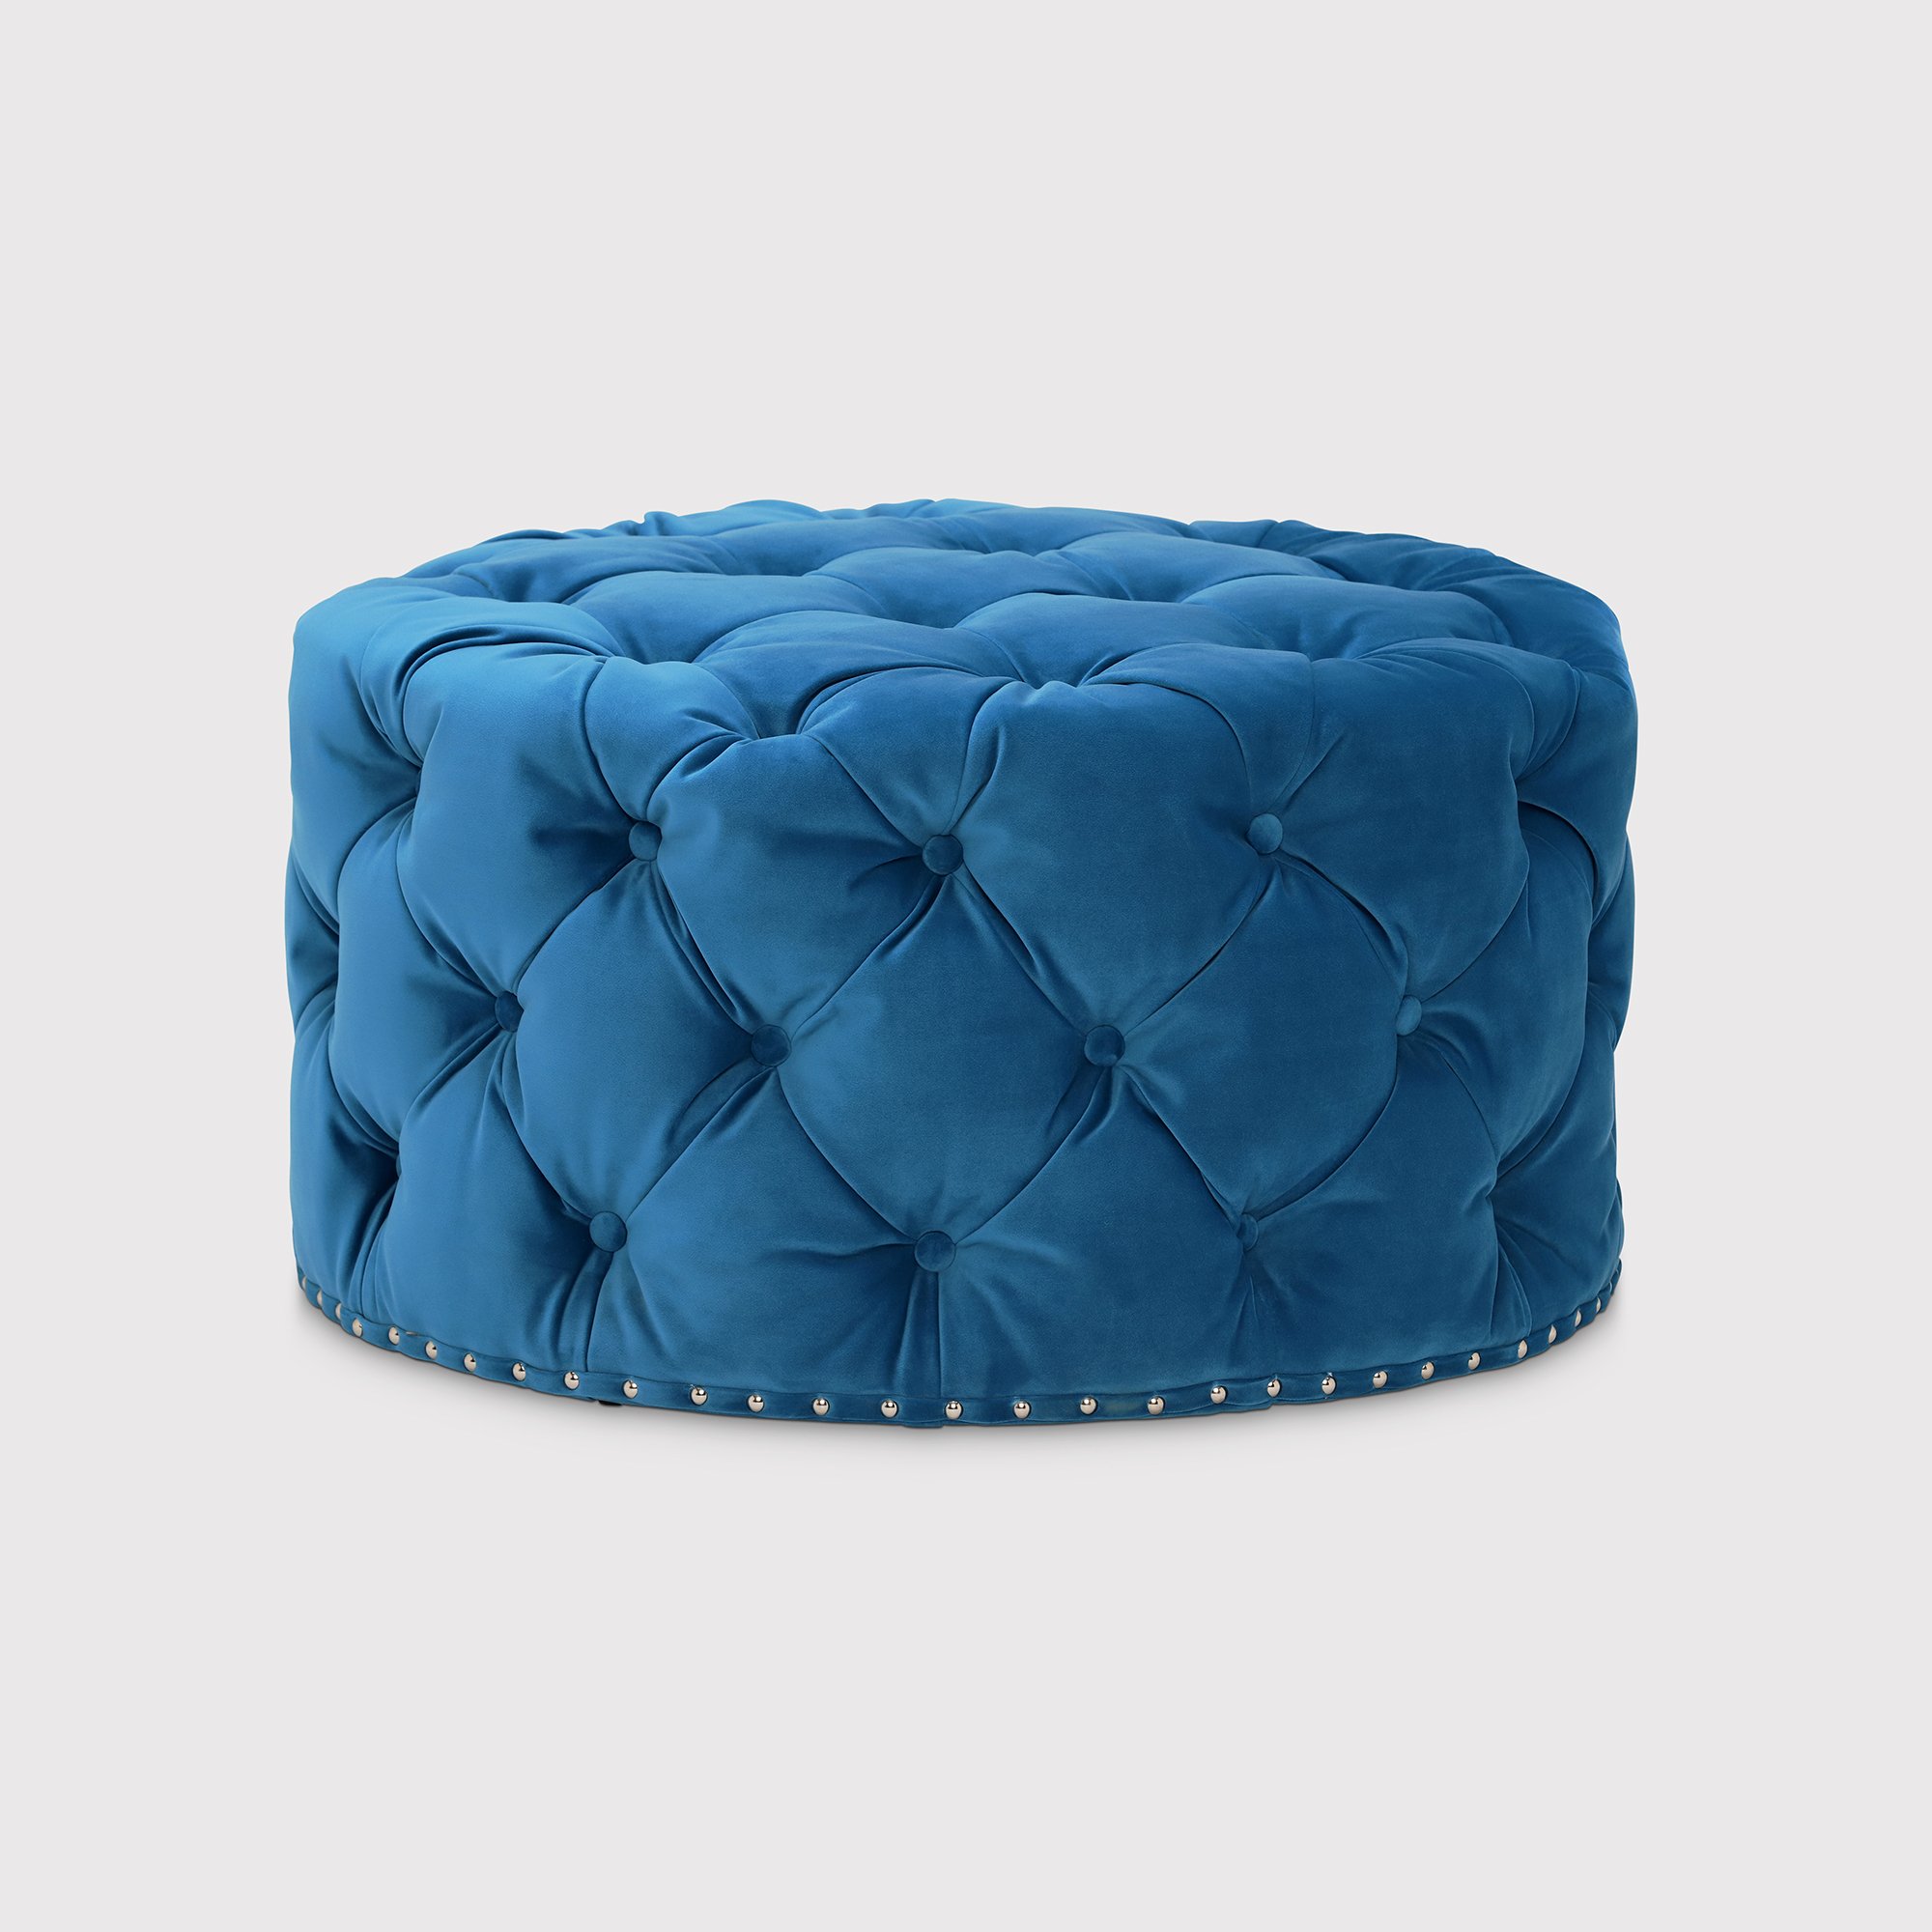 Timothy Oulton Lord Digsby Round Medium Footstool, Blue Fabric | Barker & Stonehouse